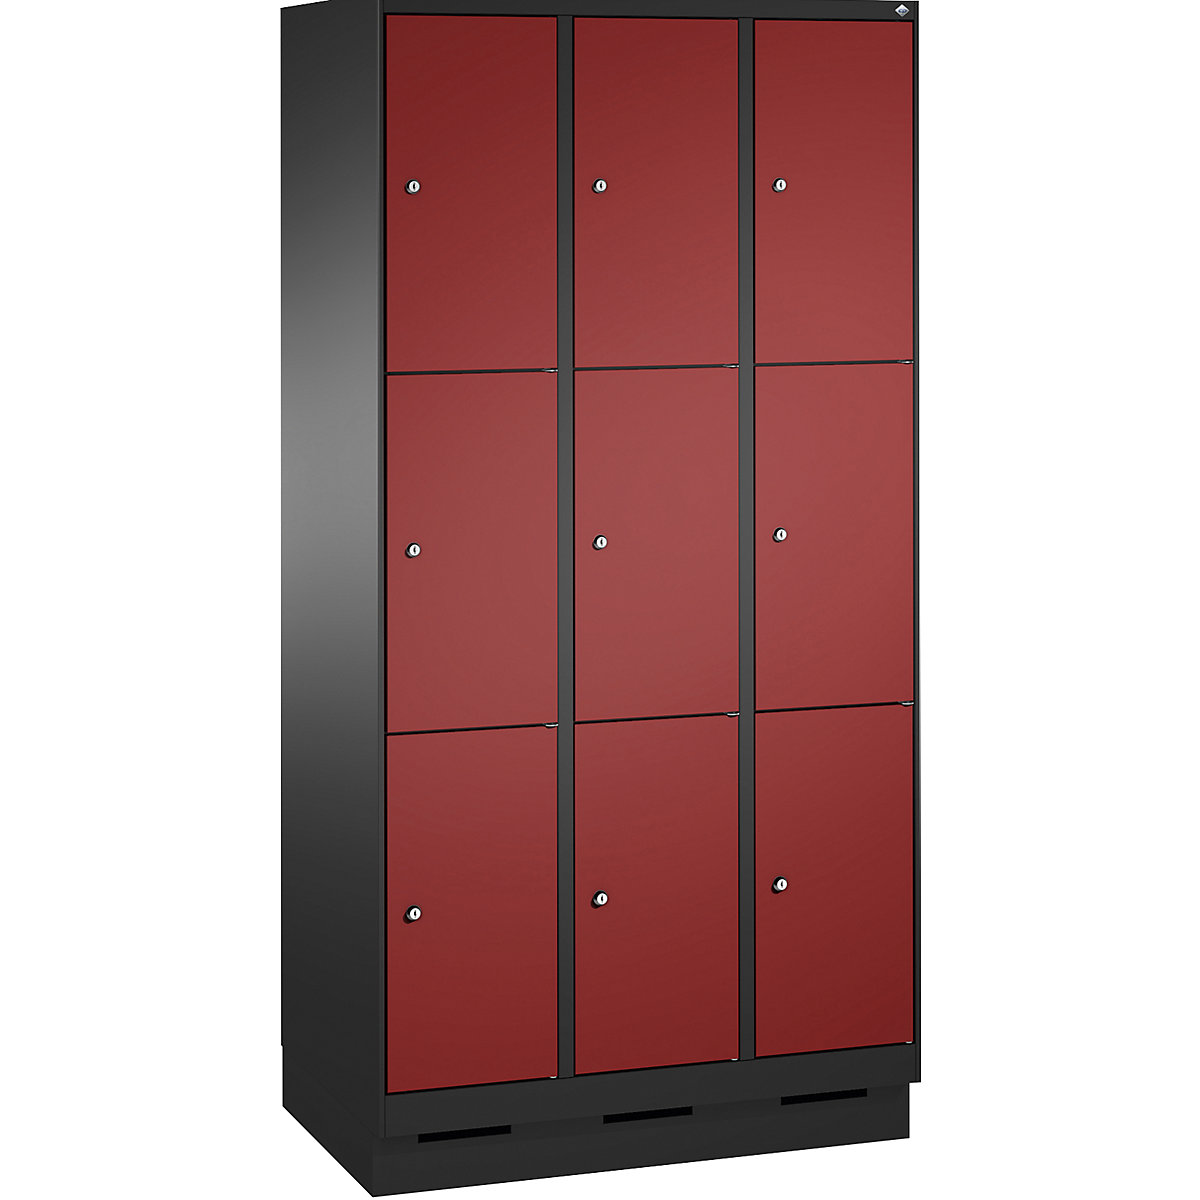 EVOLO locker unit, with plinth – C+P, 3 compartments, 3 shelf compartments each, compartment width 300 mm, black grey / ruby red-5